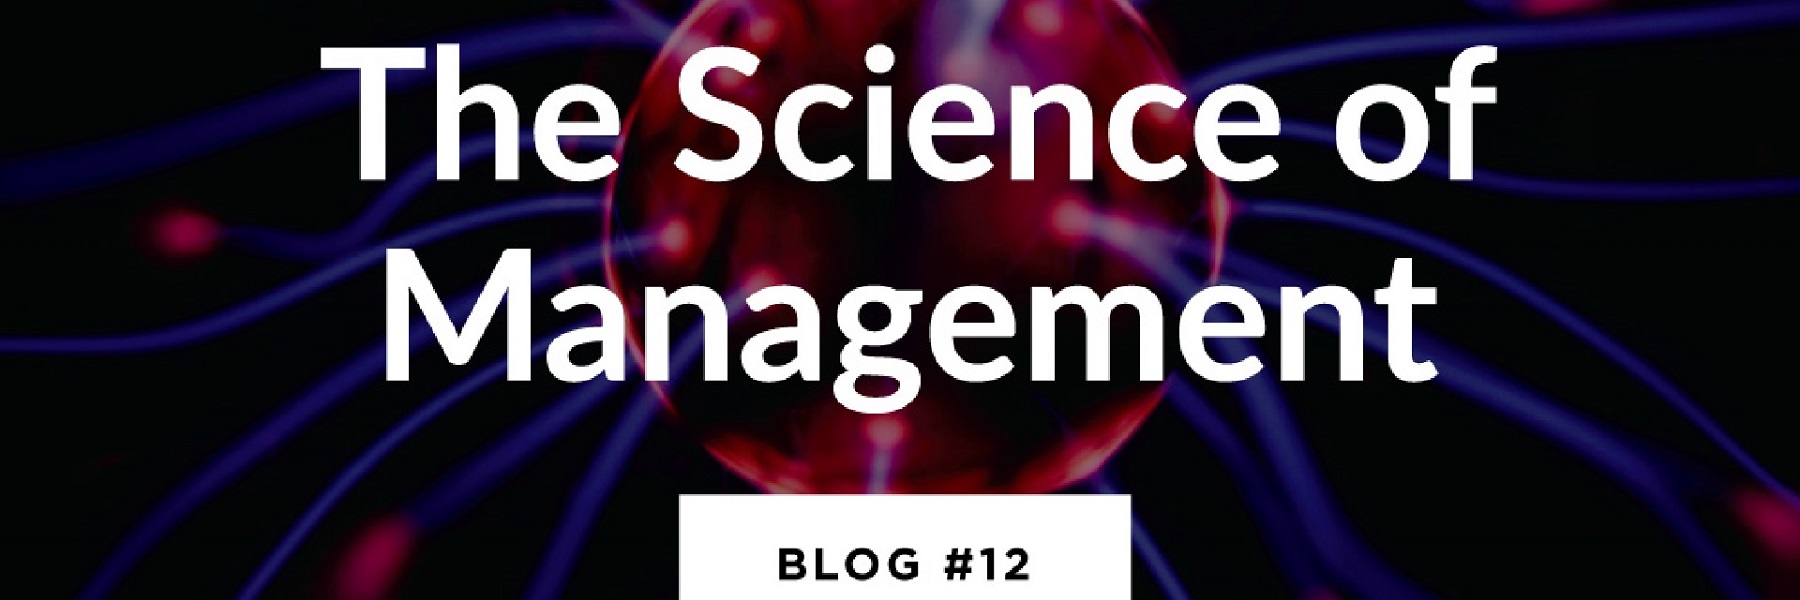 Graphic title for blog #12, 'The Science of Management'.